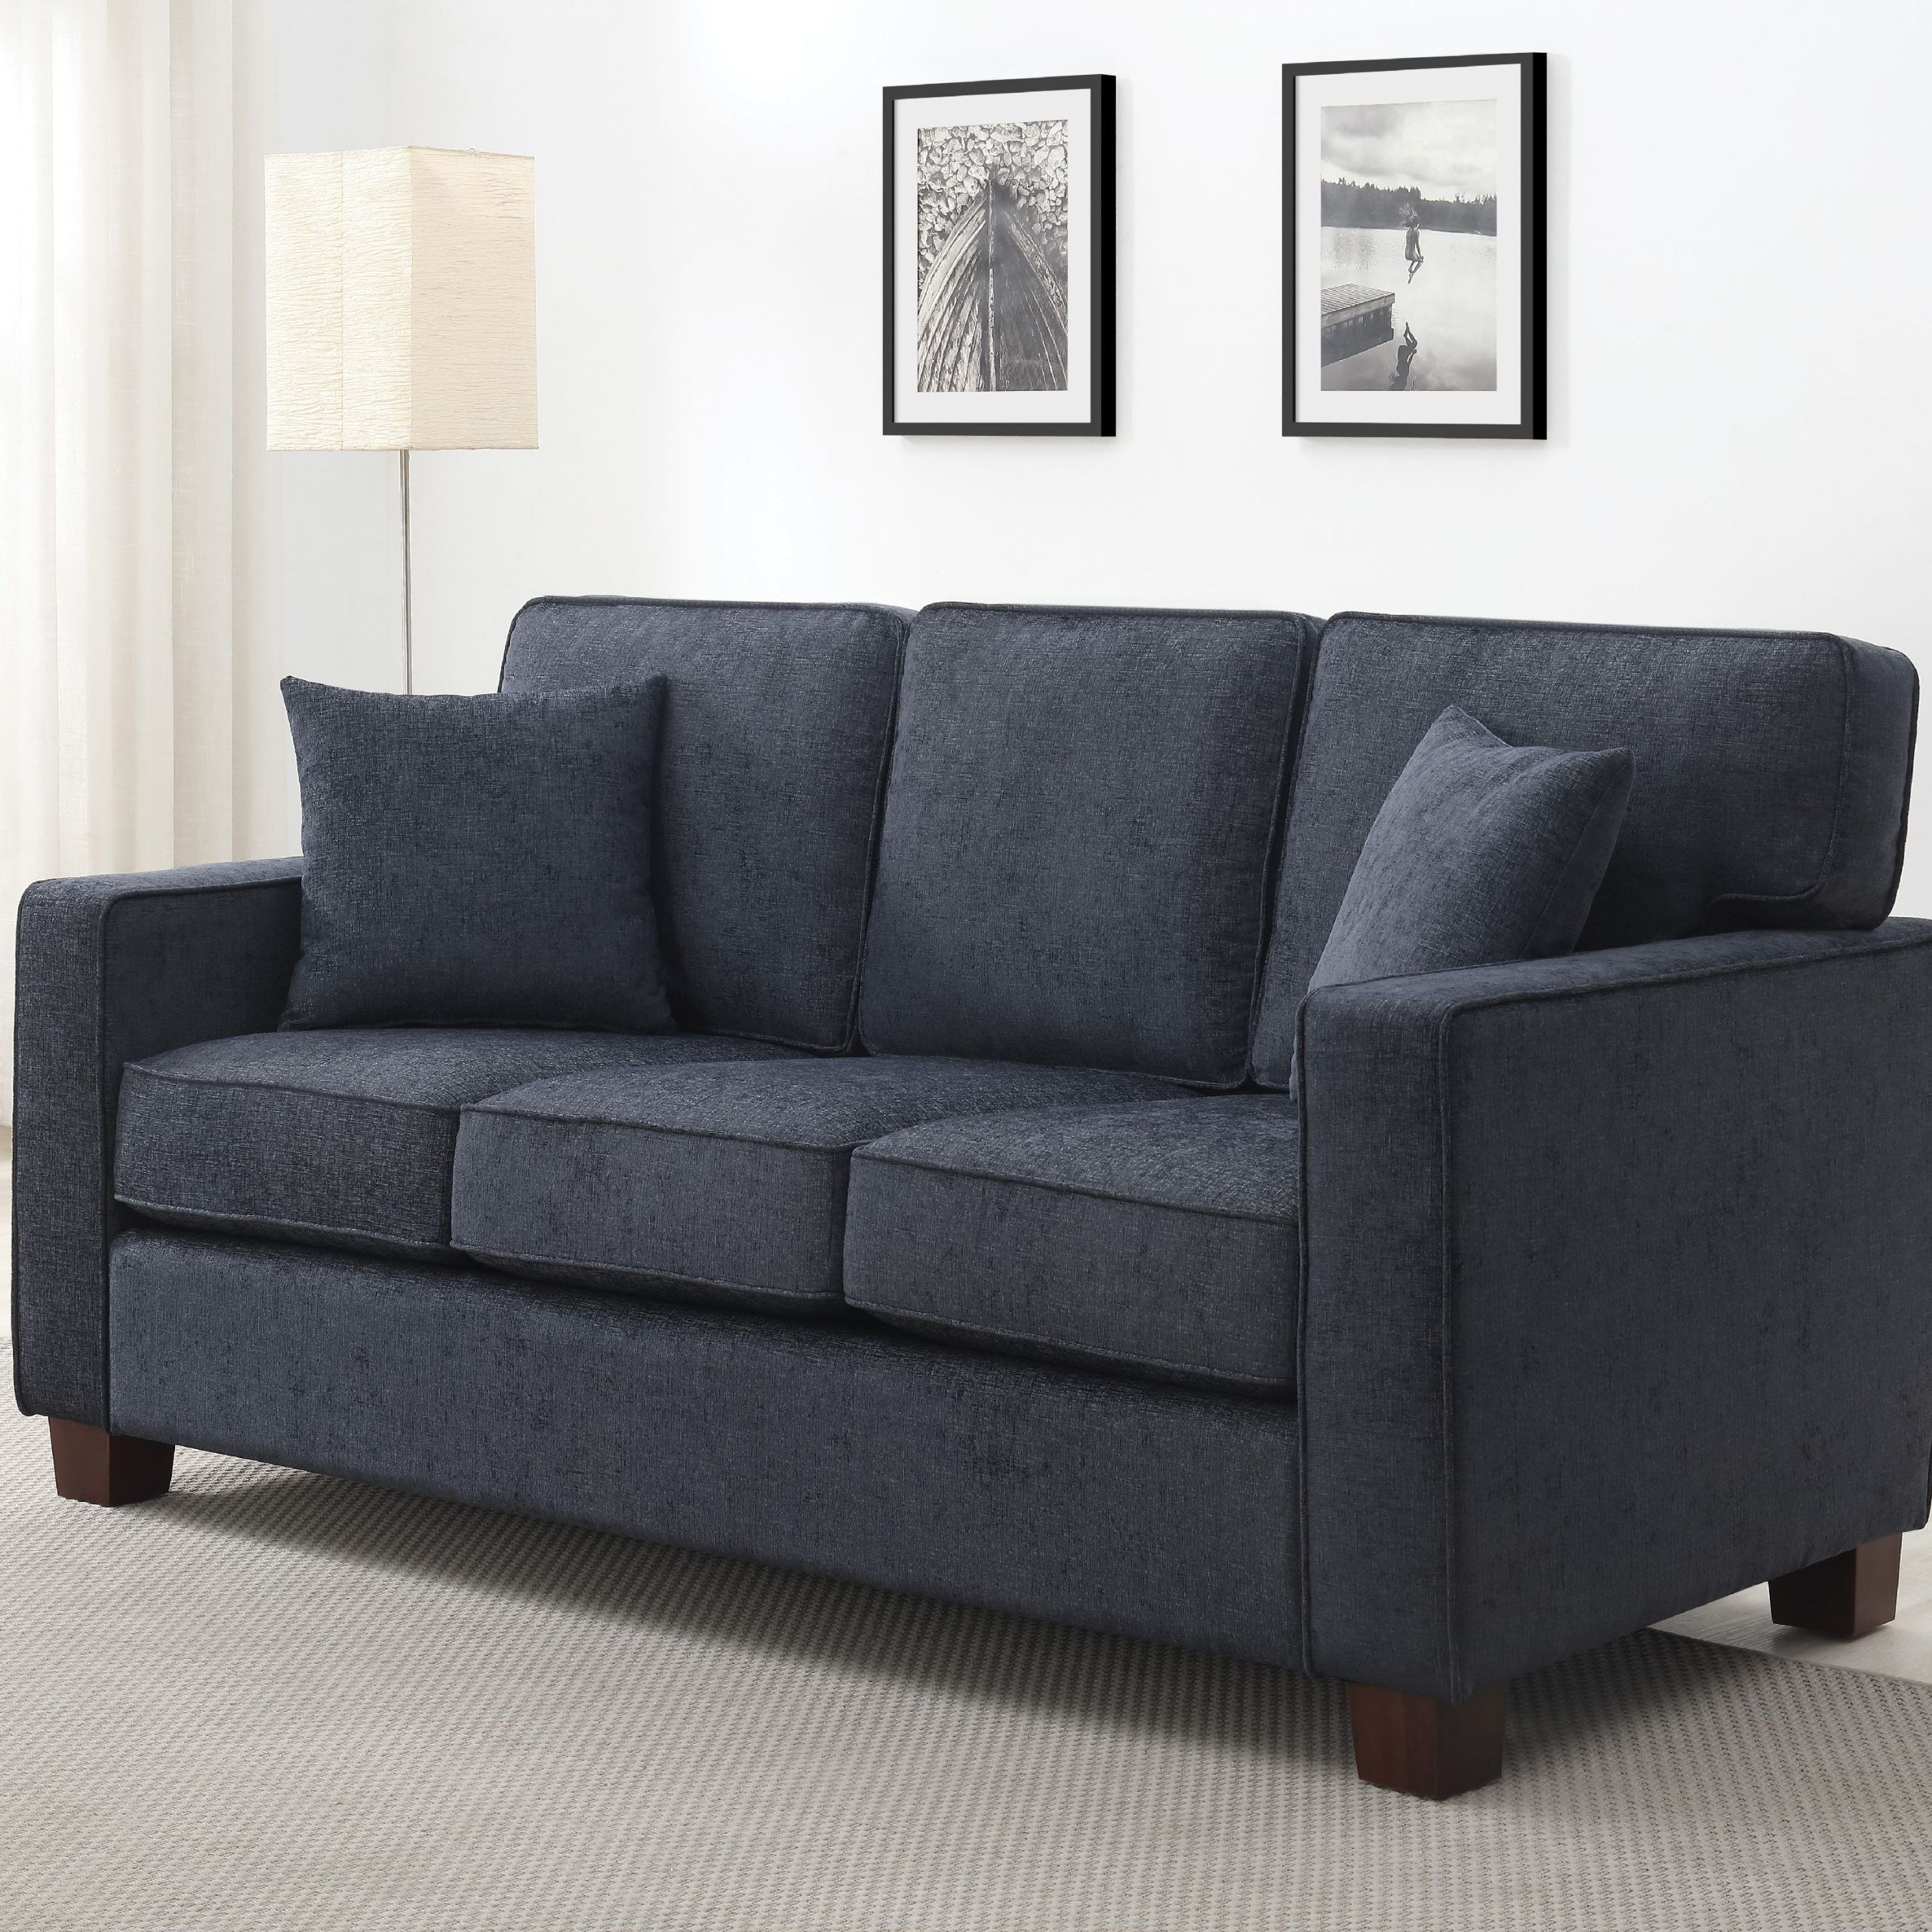 Osp Home Furnishings Russell 3 Seater Sofa In Navy Fabric 3/ctn With Navy Sleeper Sofa Couches (View 11 of 20)